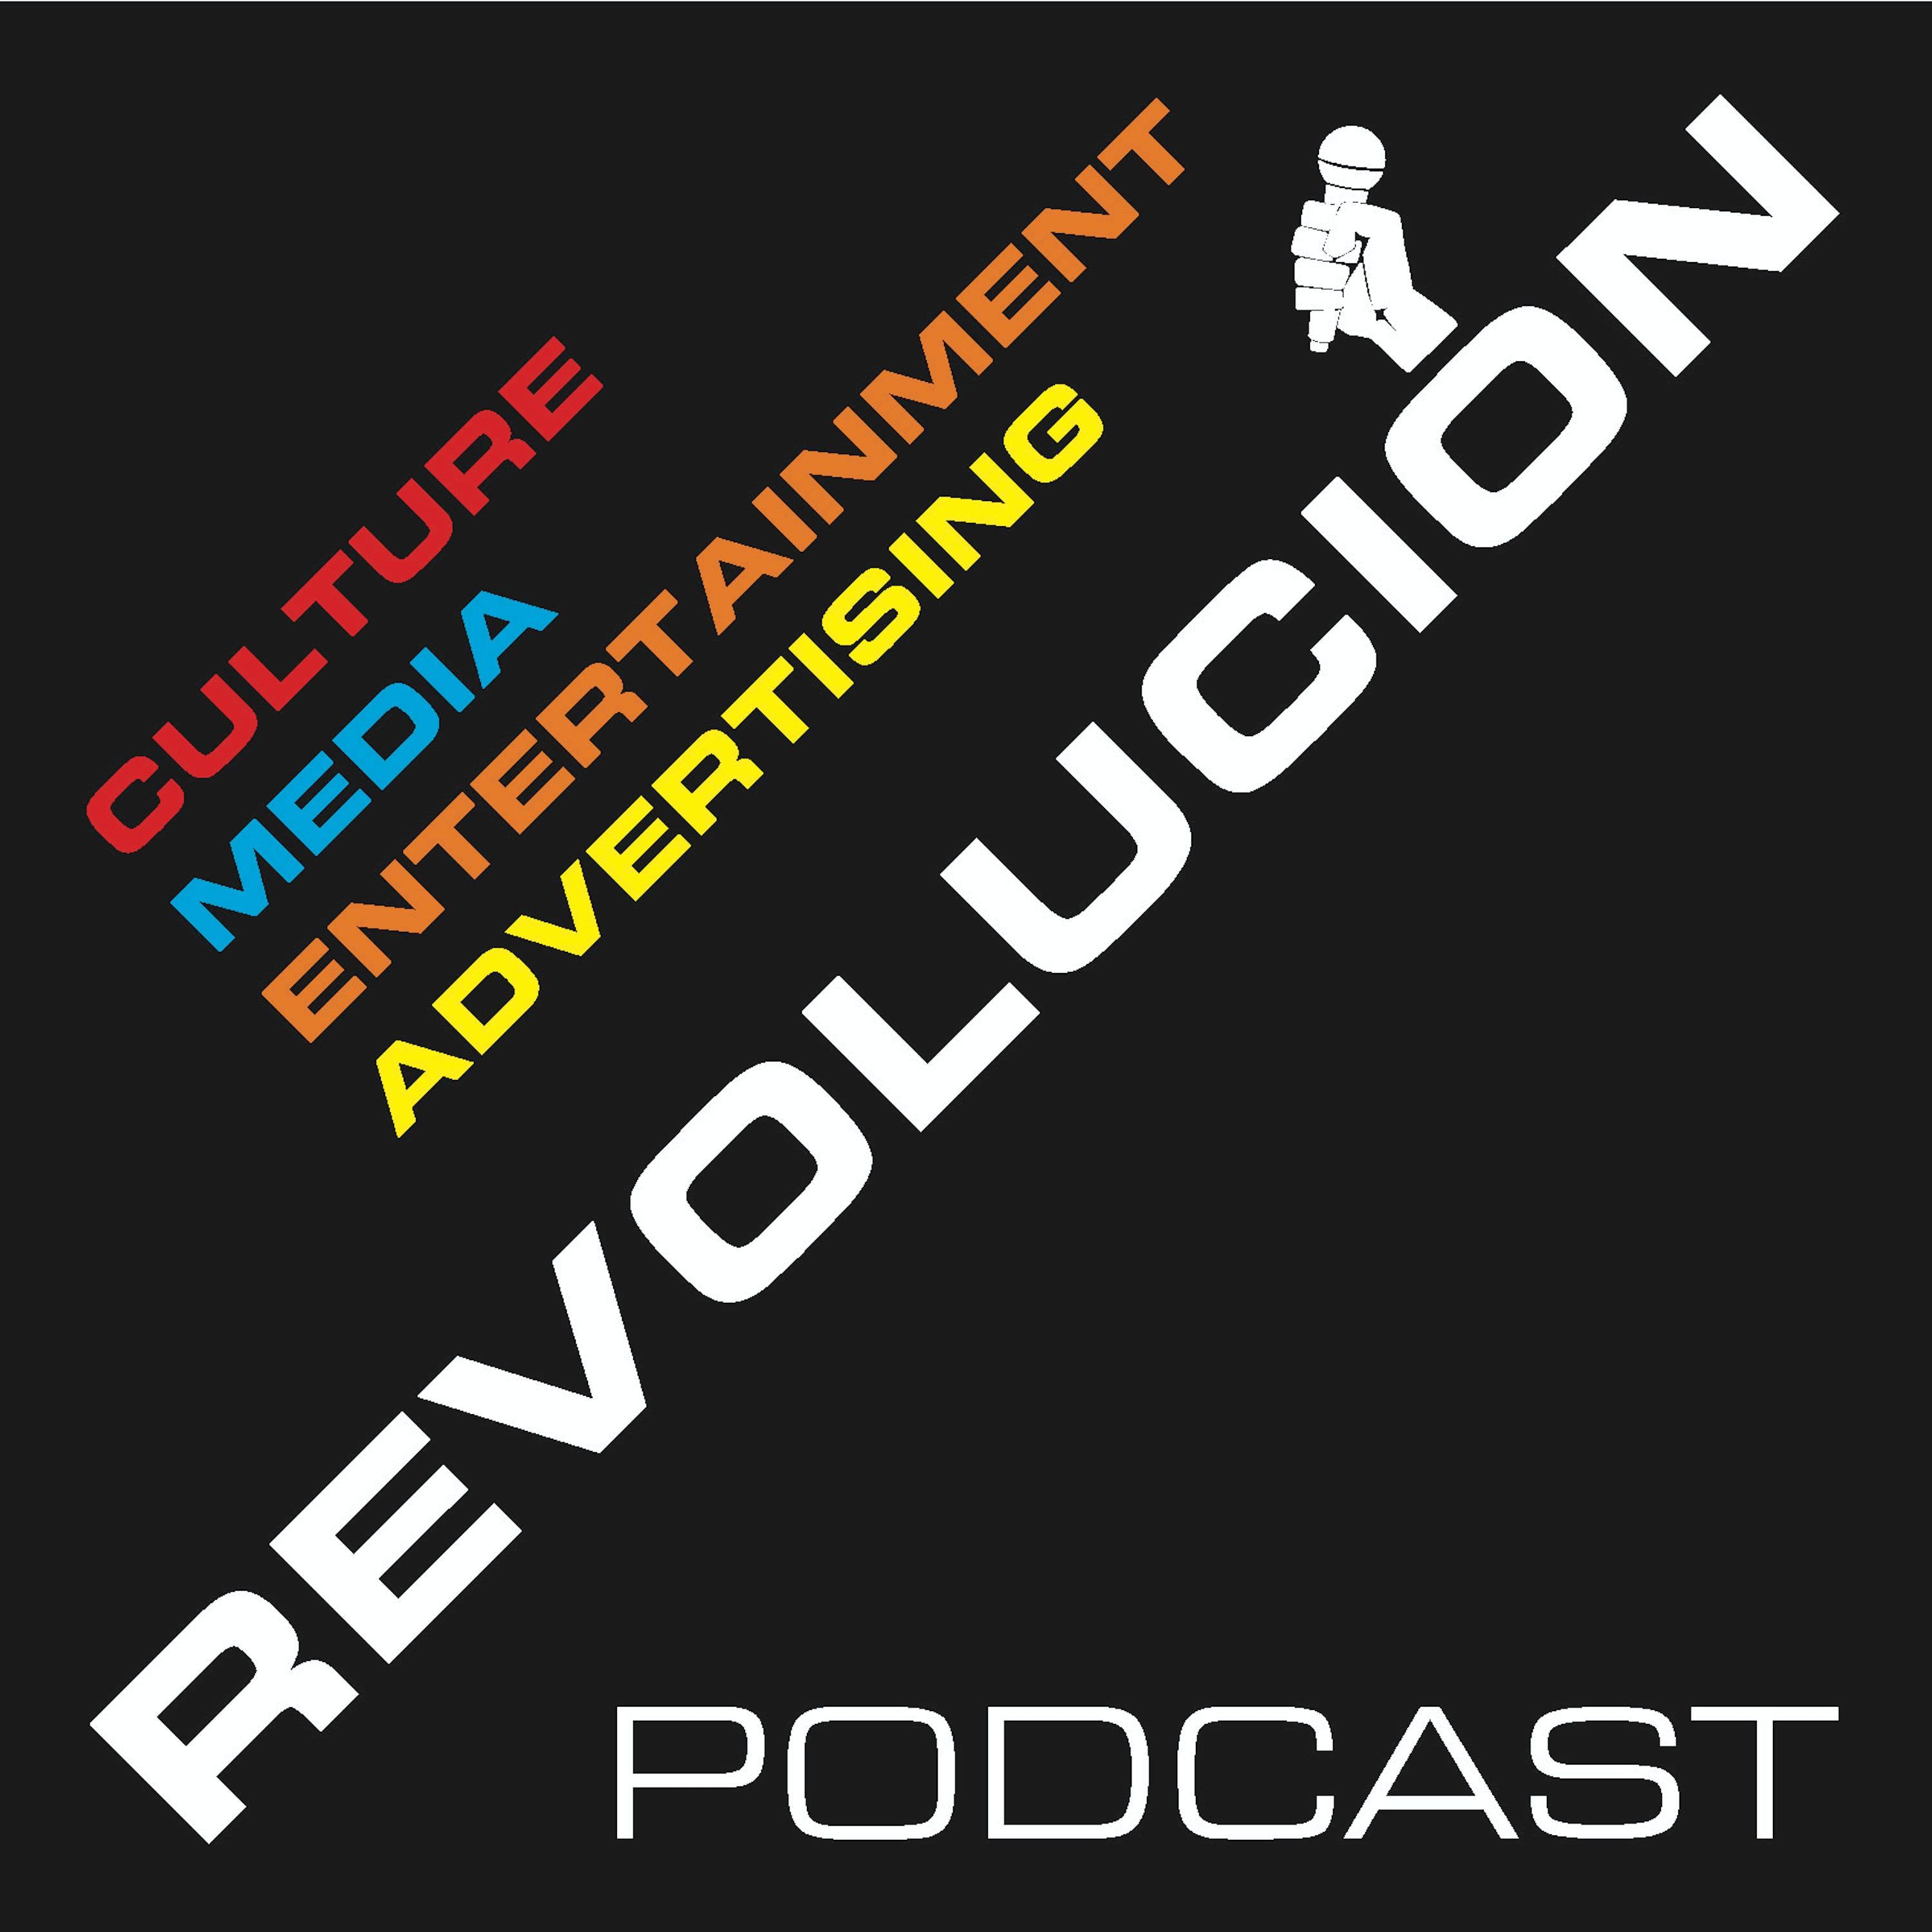 Show poster of The Revolución Podcast